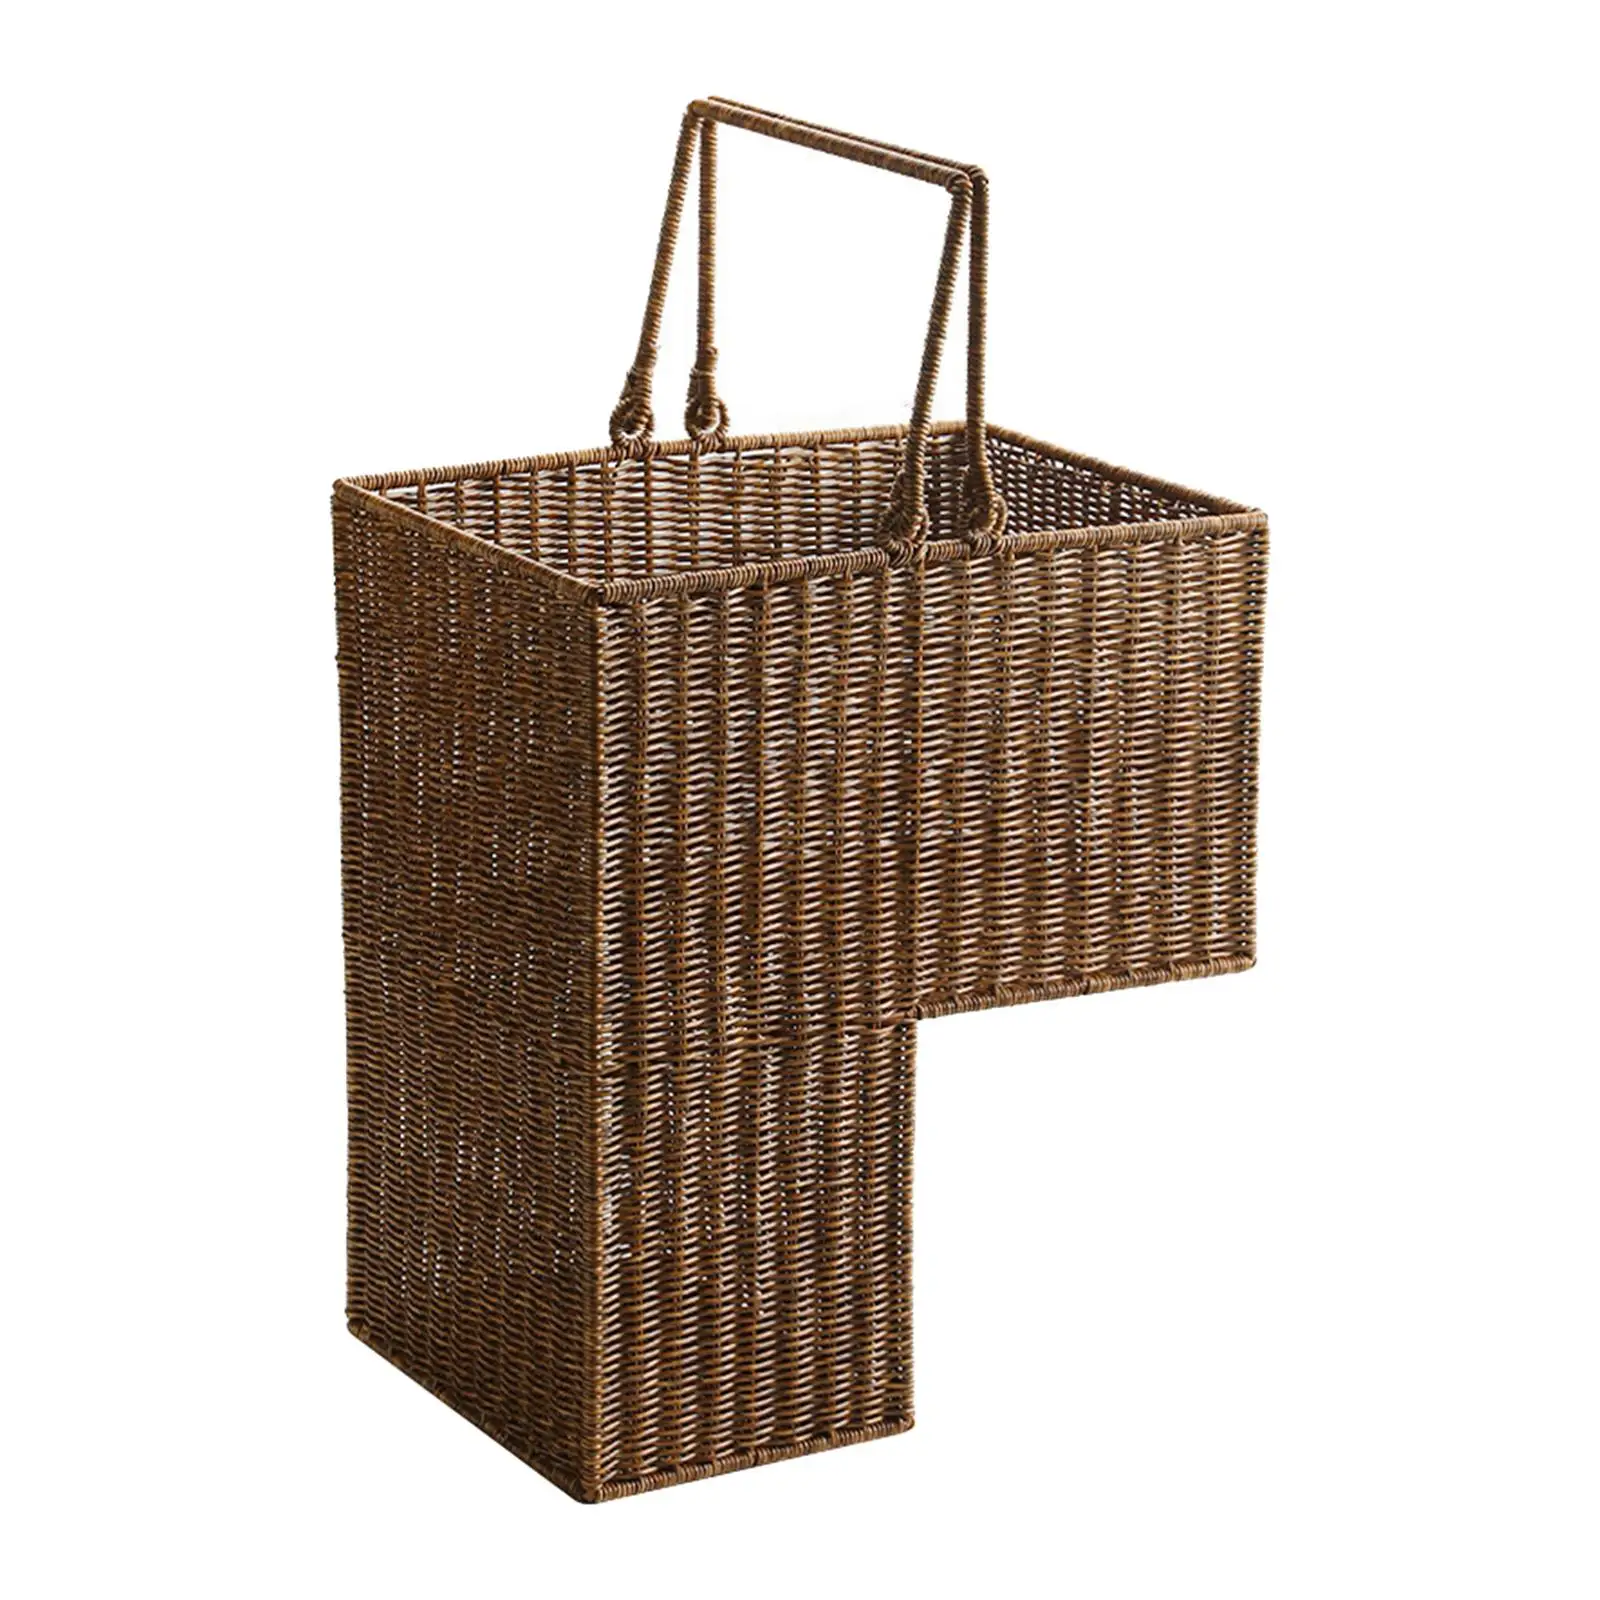 Storage Stair Basket with Handle Portable Stackable Handwoven Space Saving for Books Toiletries Home Decorative Patio Bathroom